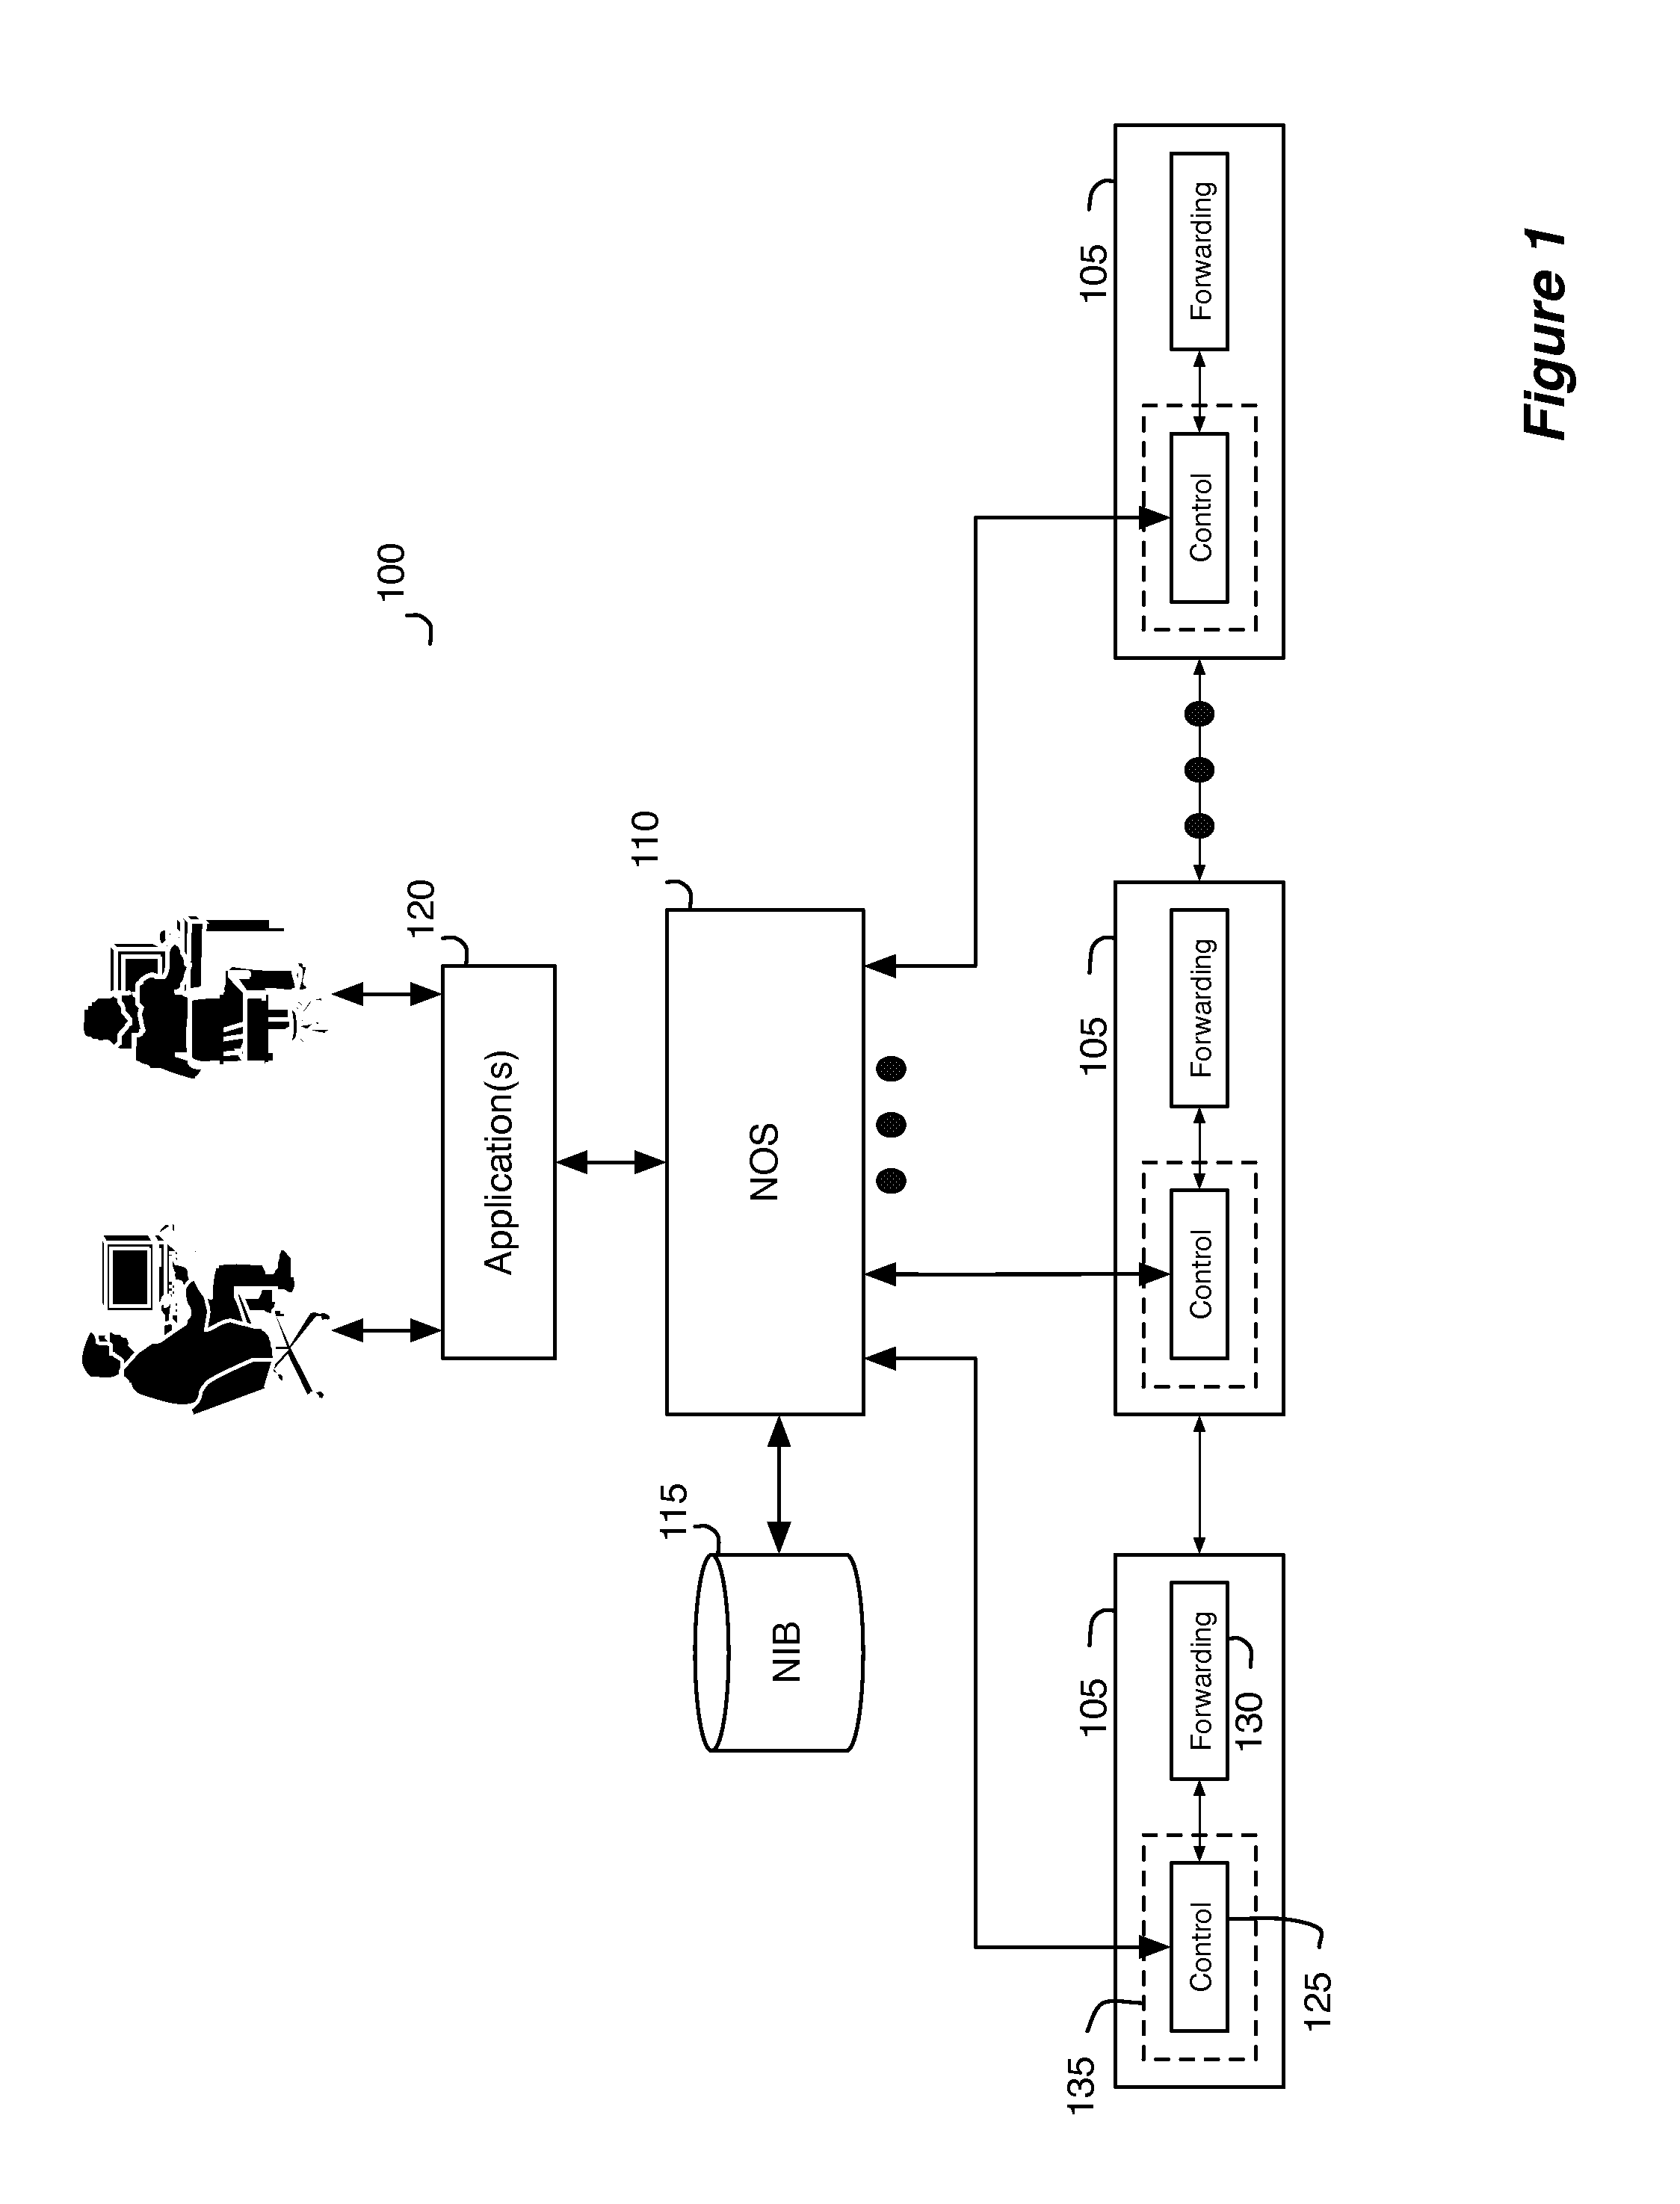 Network control apparatus and method with table mapping engine